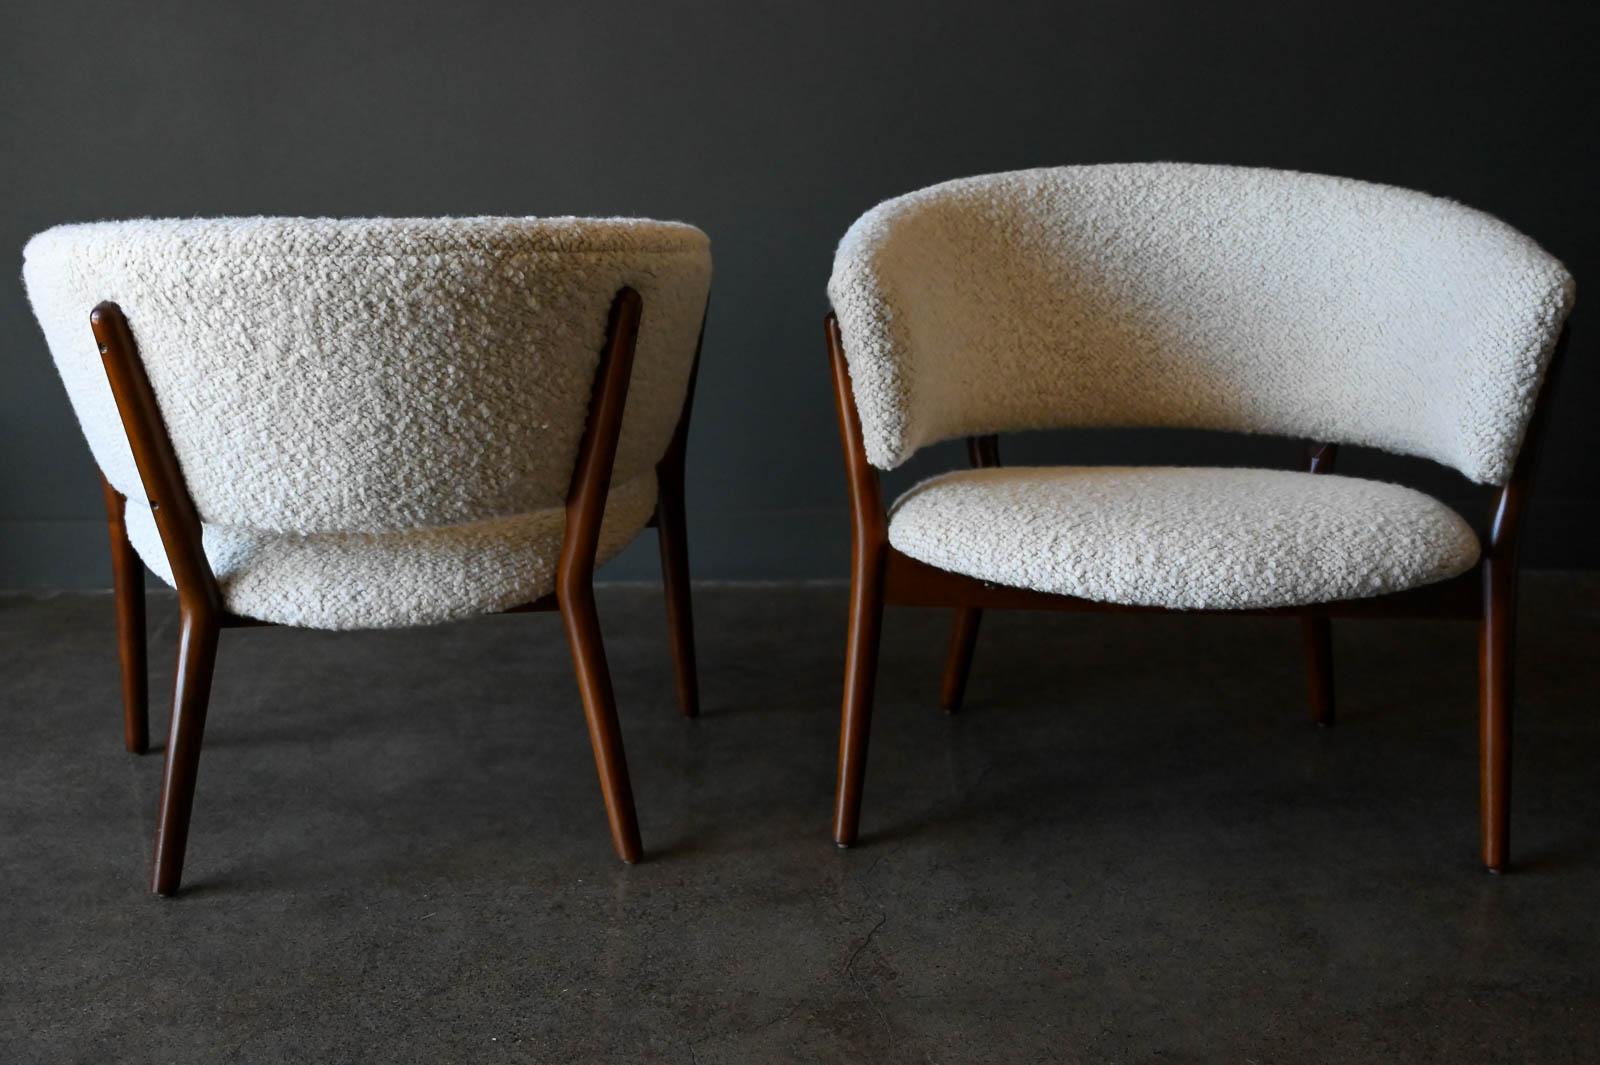 Pair of Nanna Ditzel Model 83 Lounge Chairs in Pierre Frey Wool Bouclé, 1952 For Sale 7